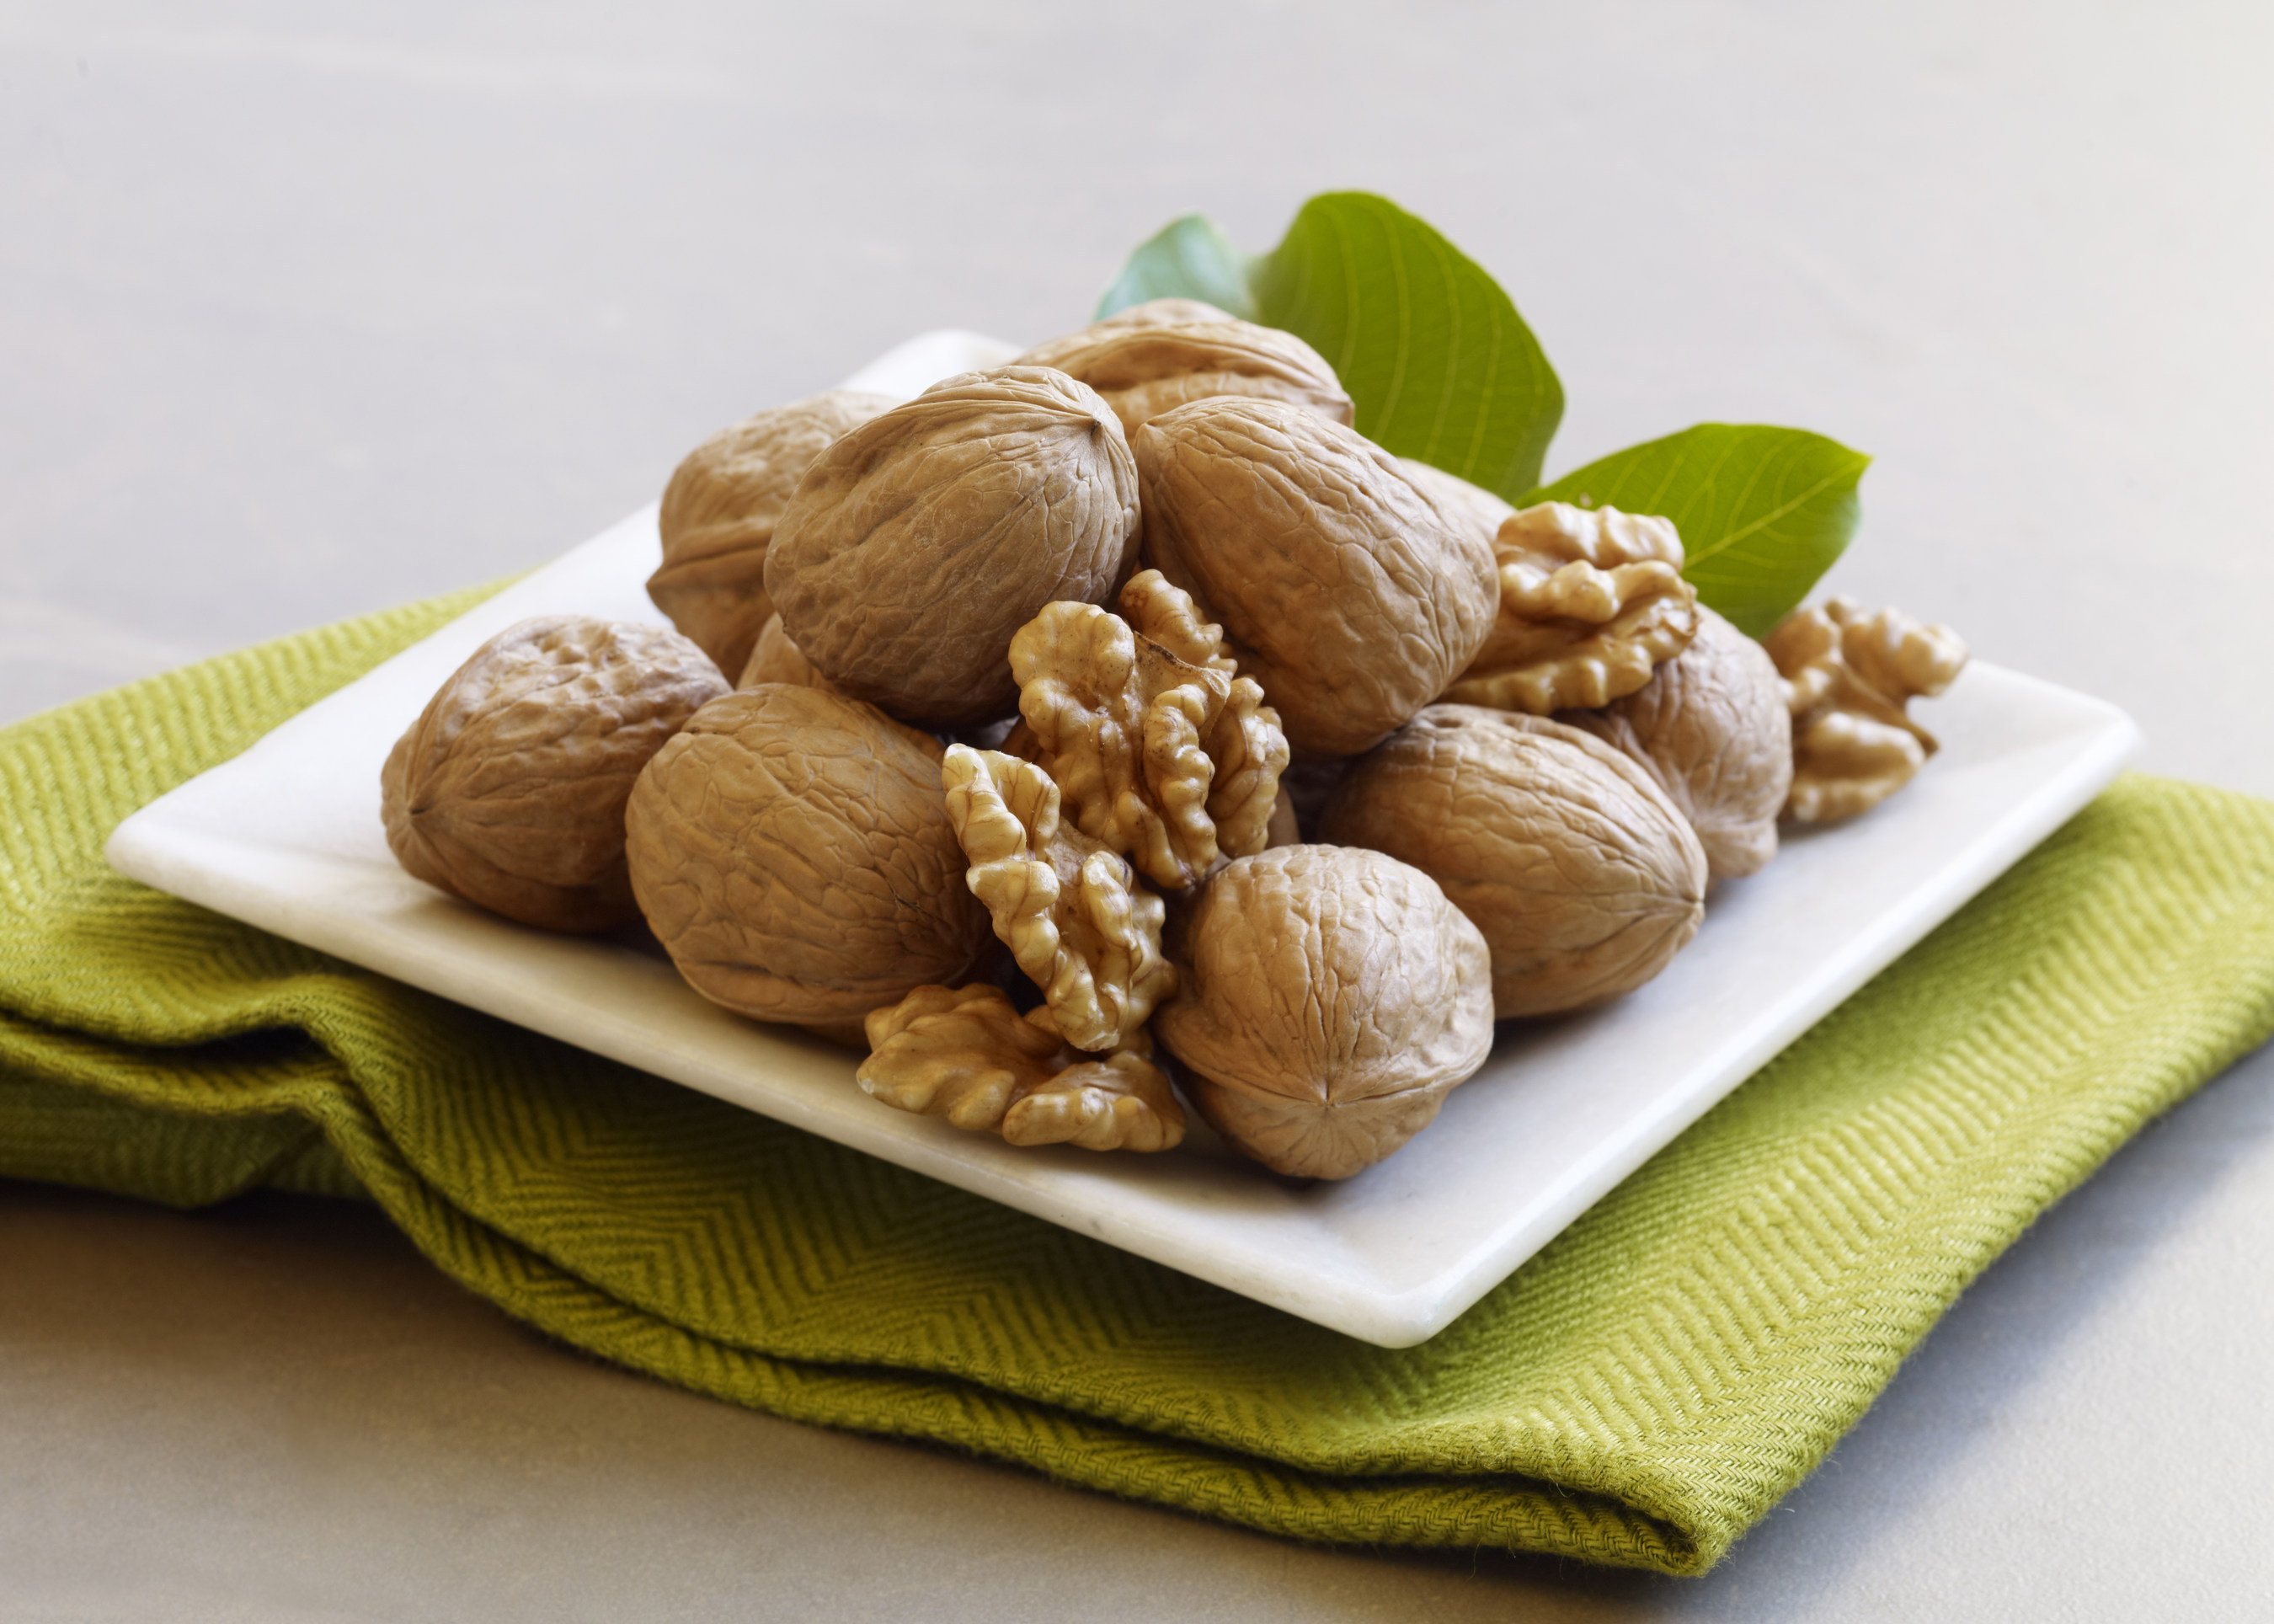 New UCLA Research Suggests Walnuts May Improve Memory